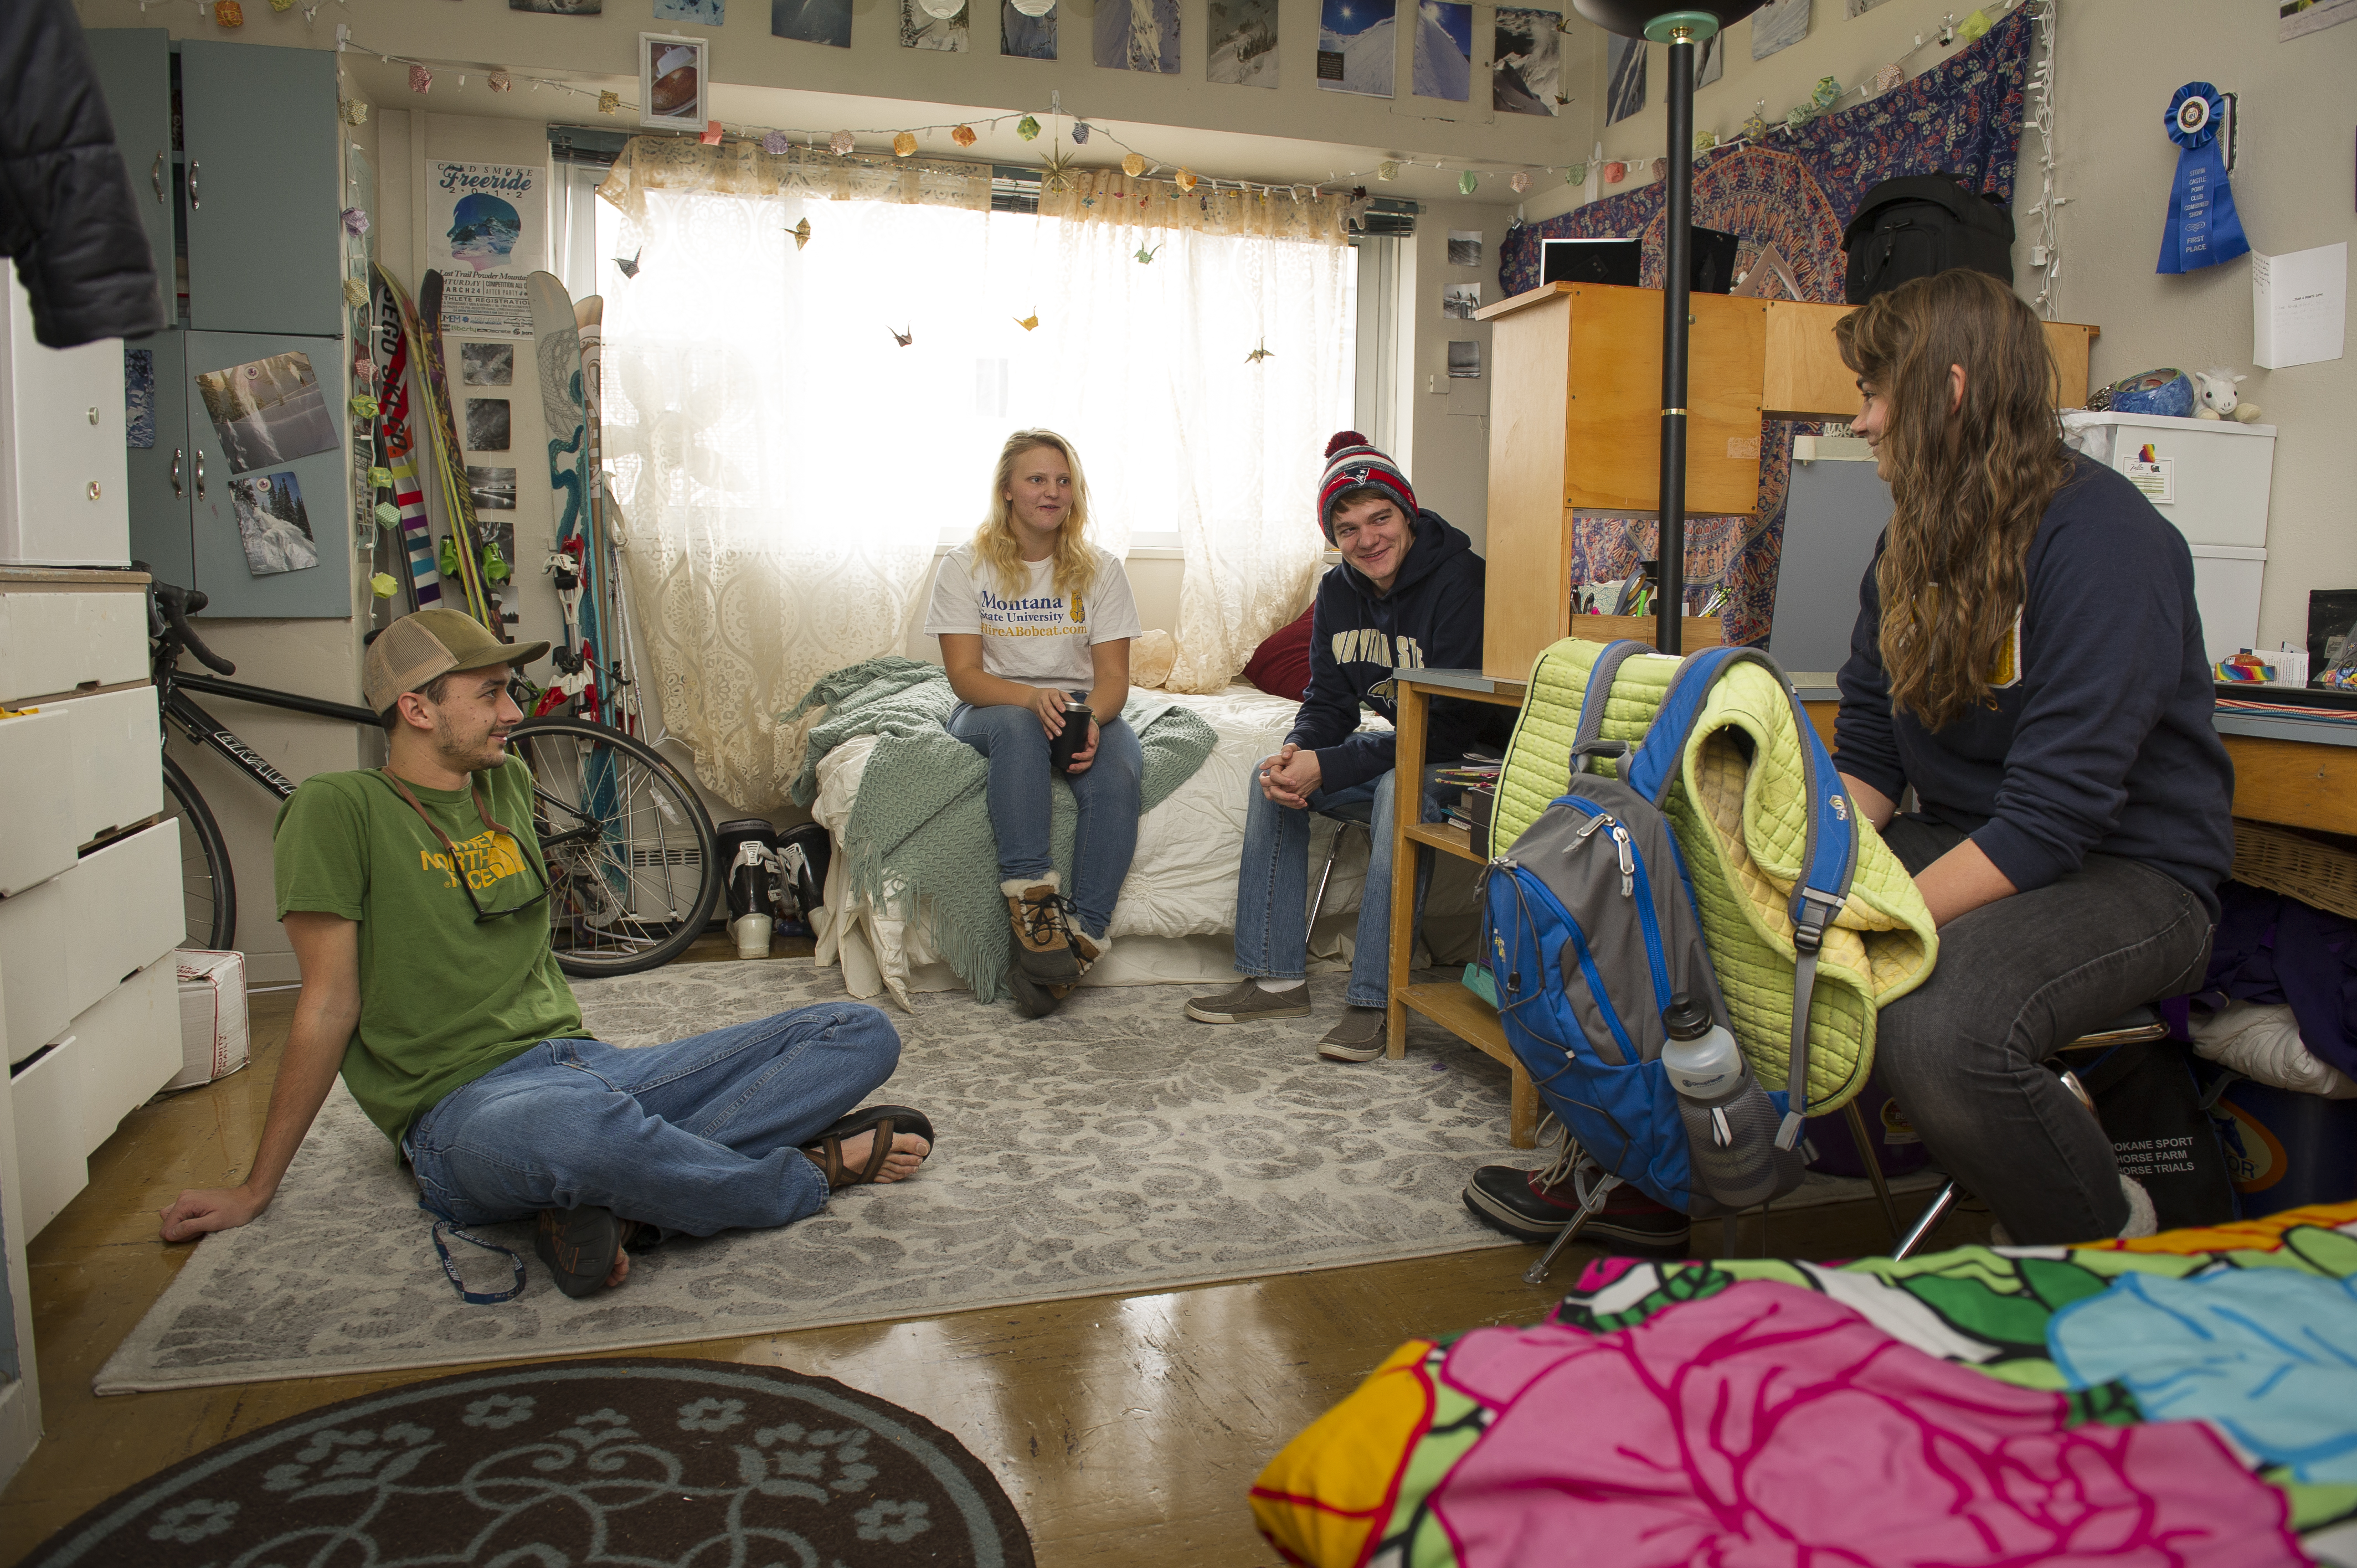 A picture of a group of students having a conversation in a dorm room